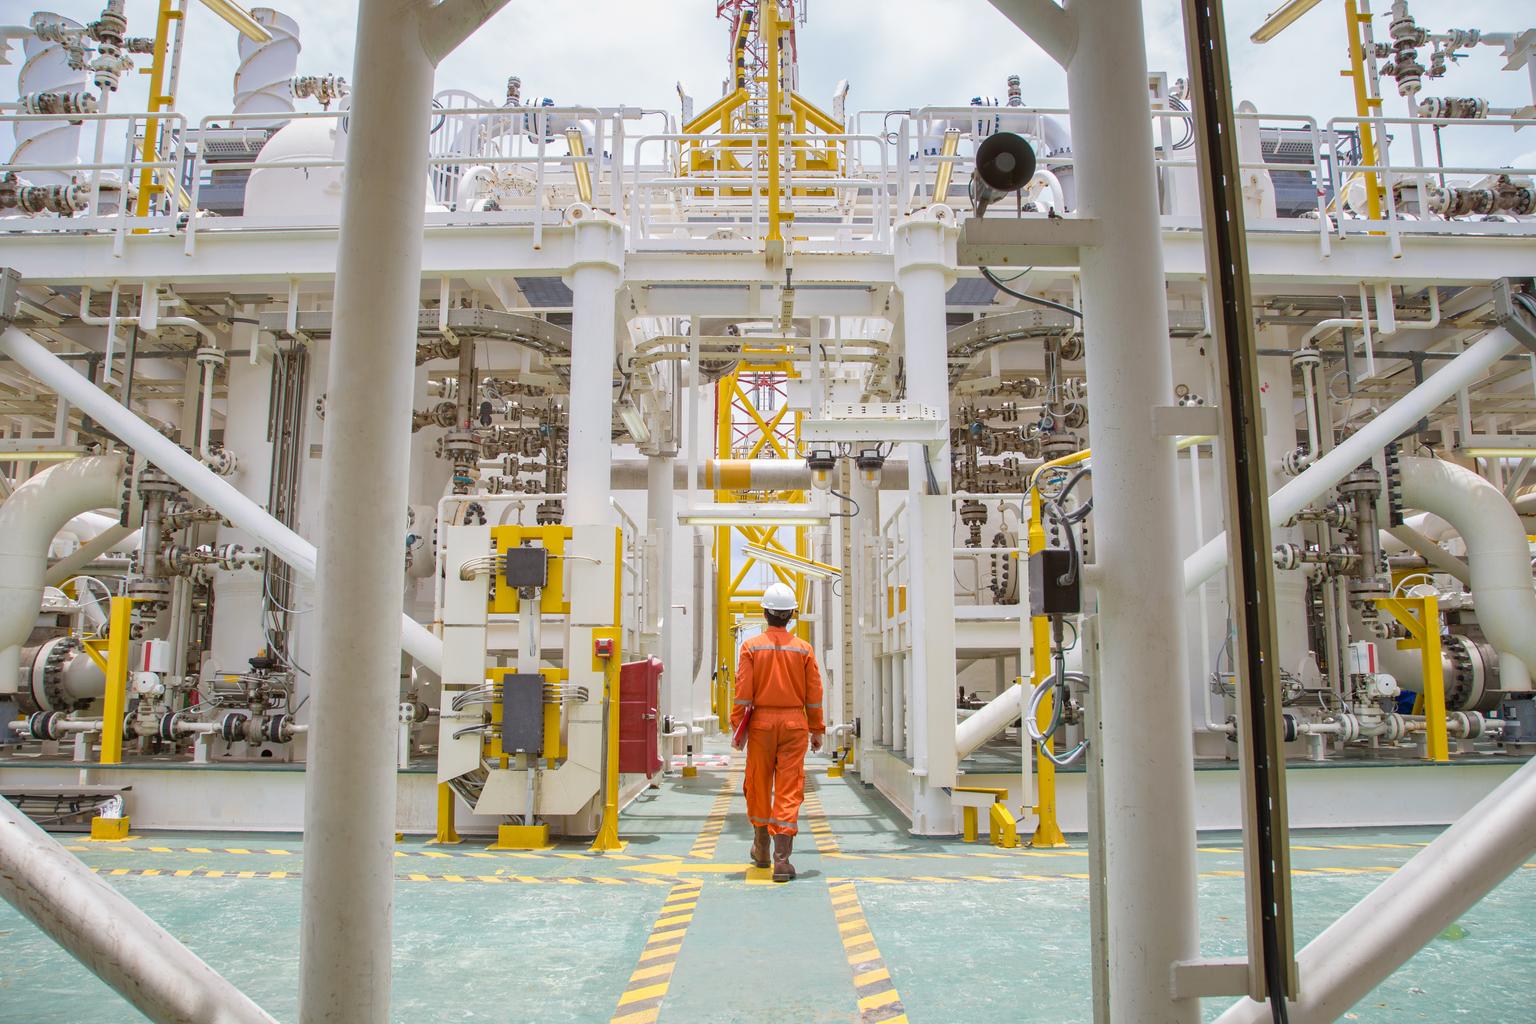 Technician walking through offshore oil and gas process for checking the condition of equipment on platform.